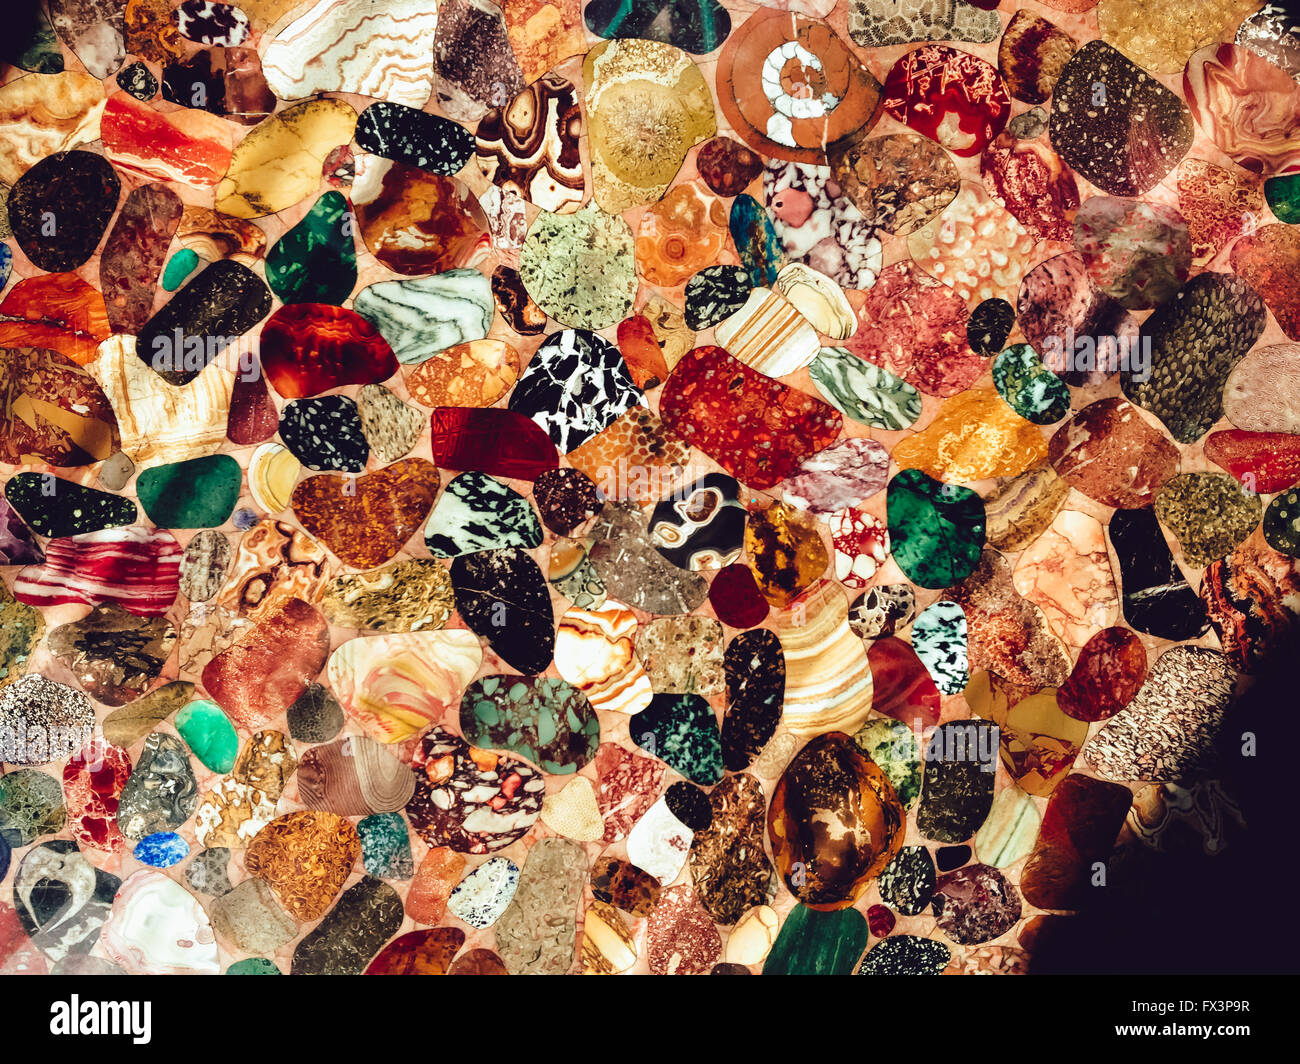 Many colored stones on a table. Stock Photo